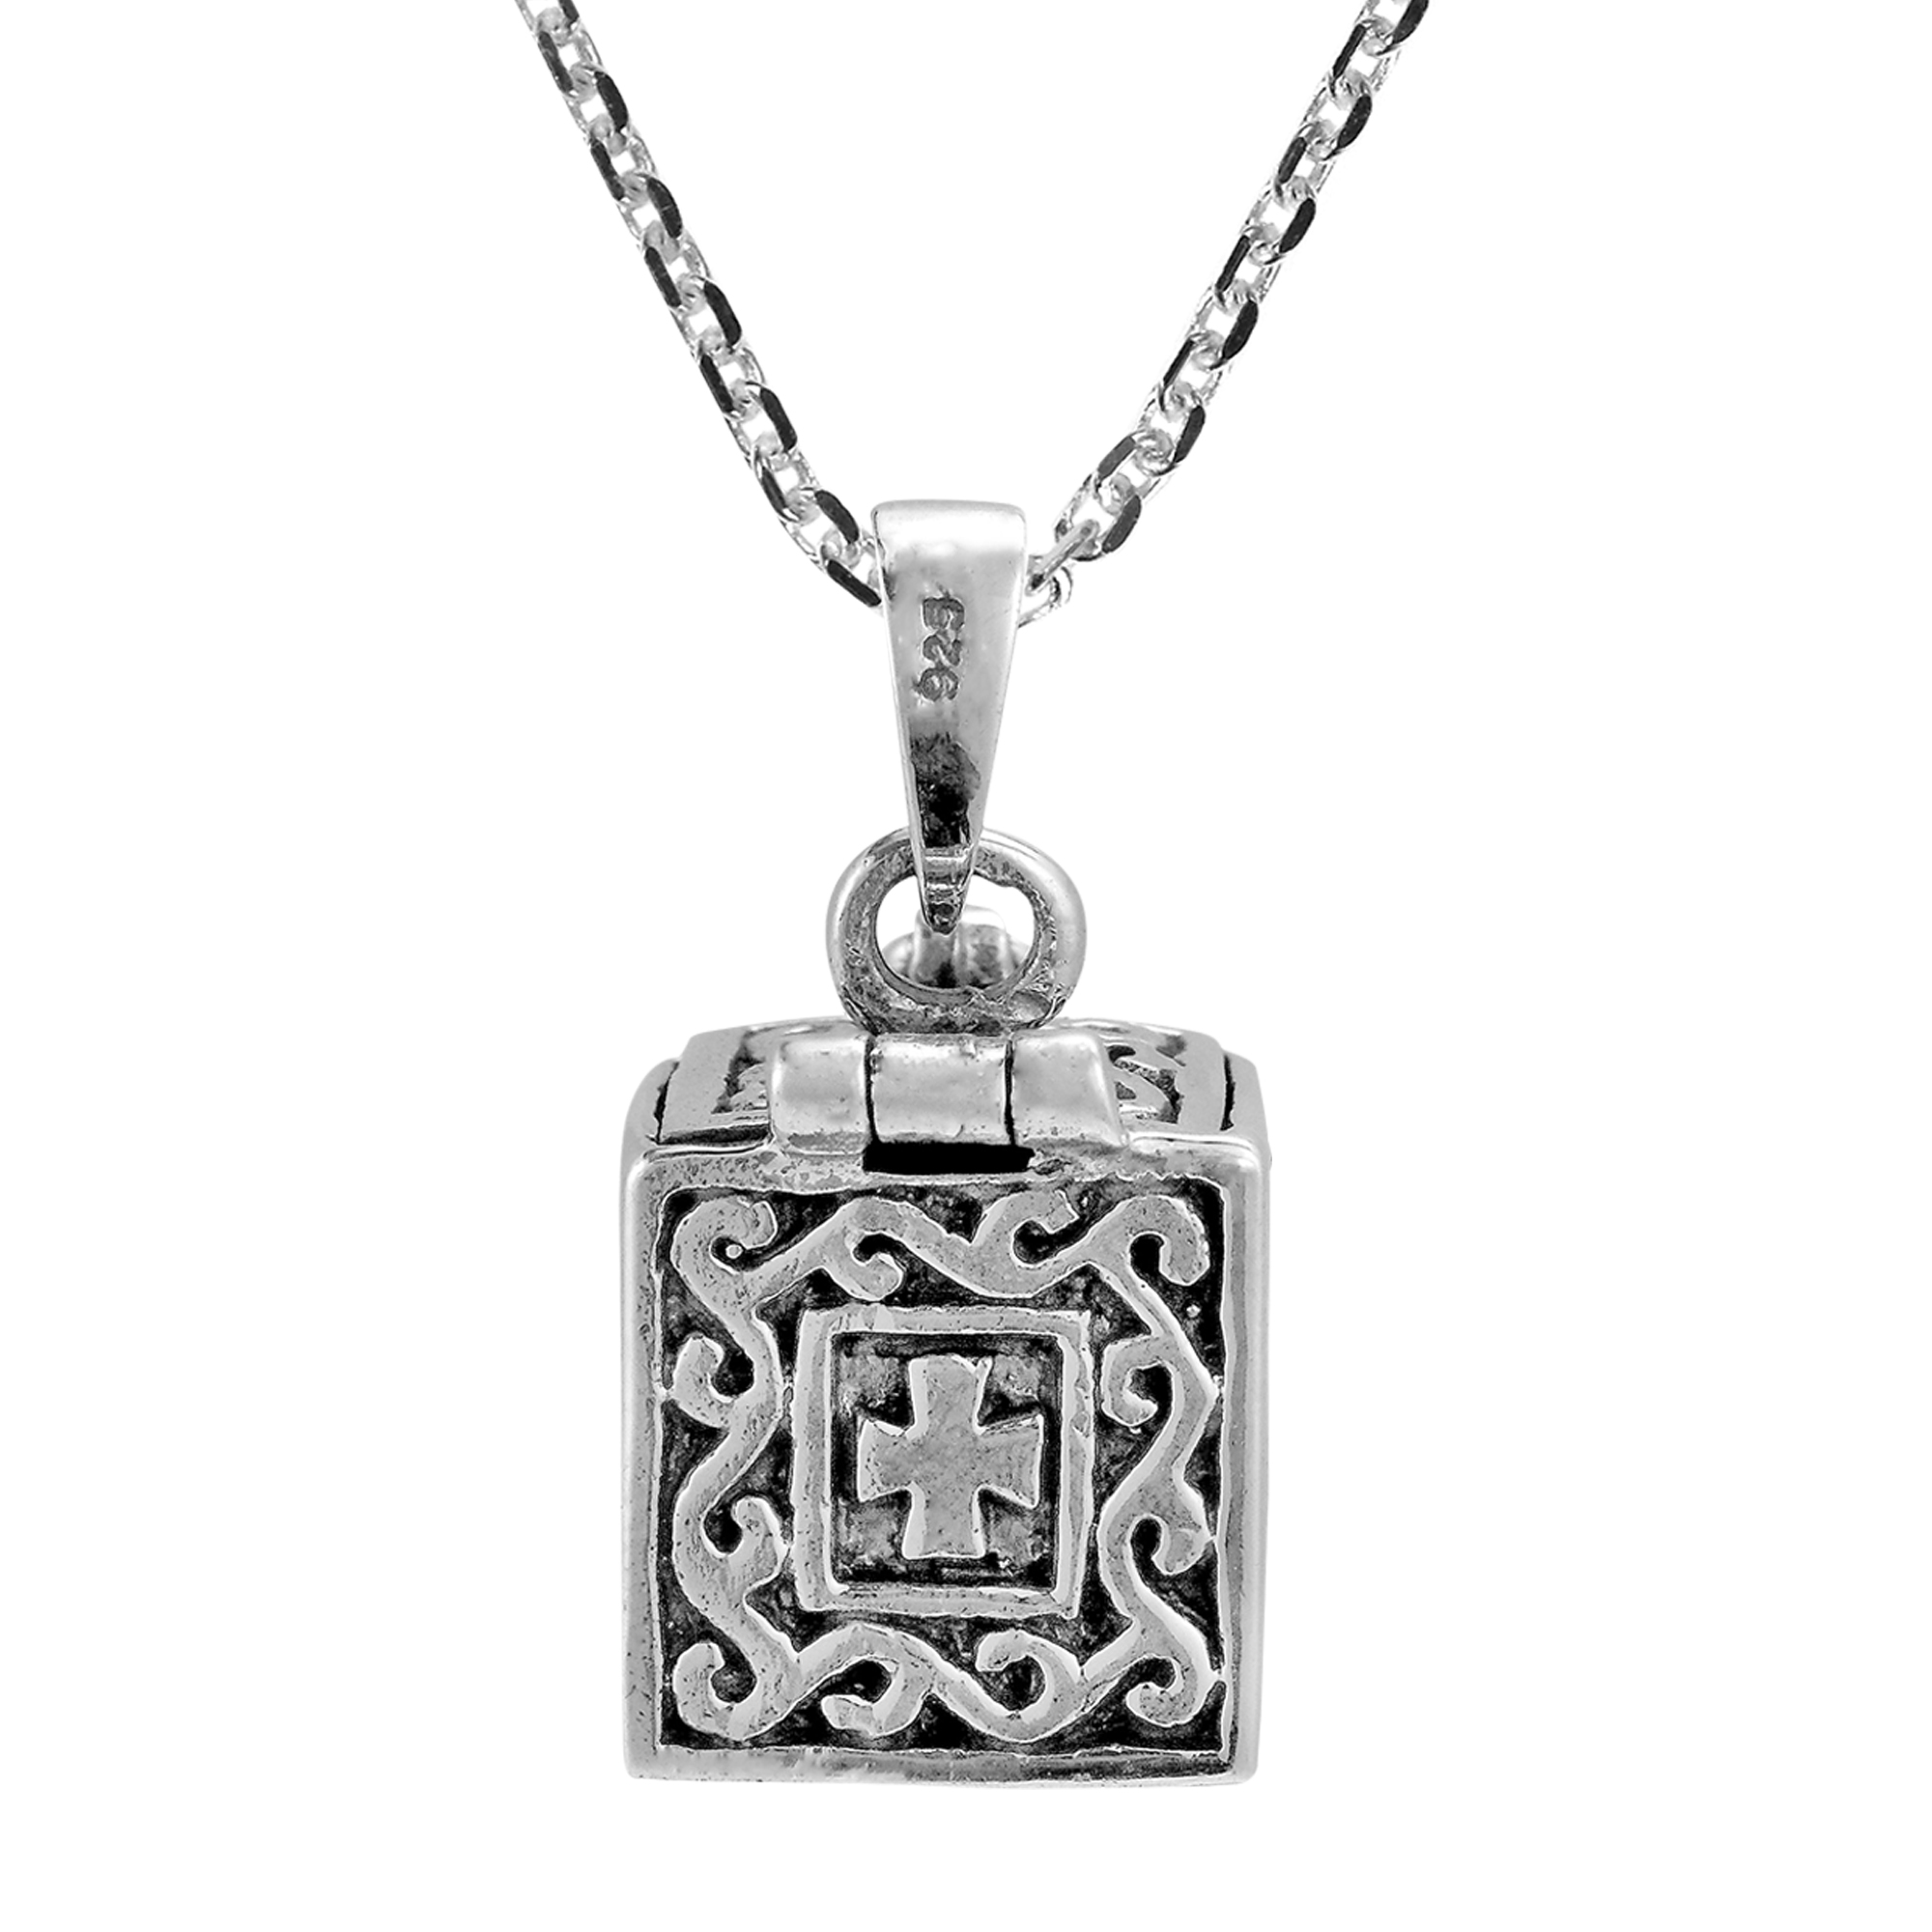 Inspirational Faith and Hope Prayer Box .925 Sterling Silver Necklace